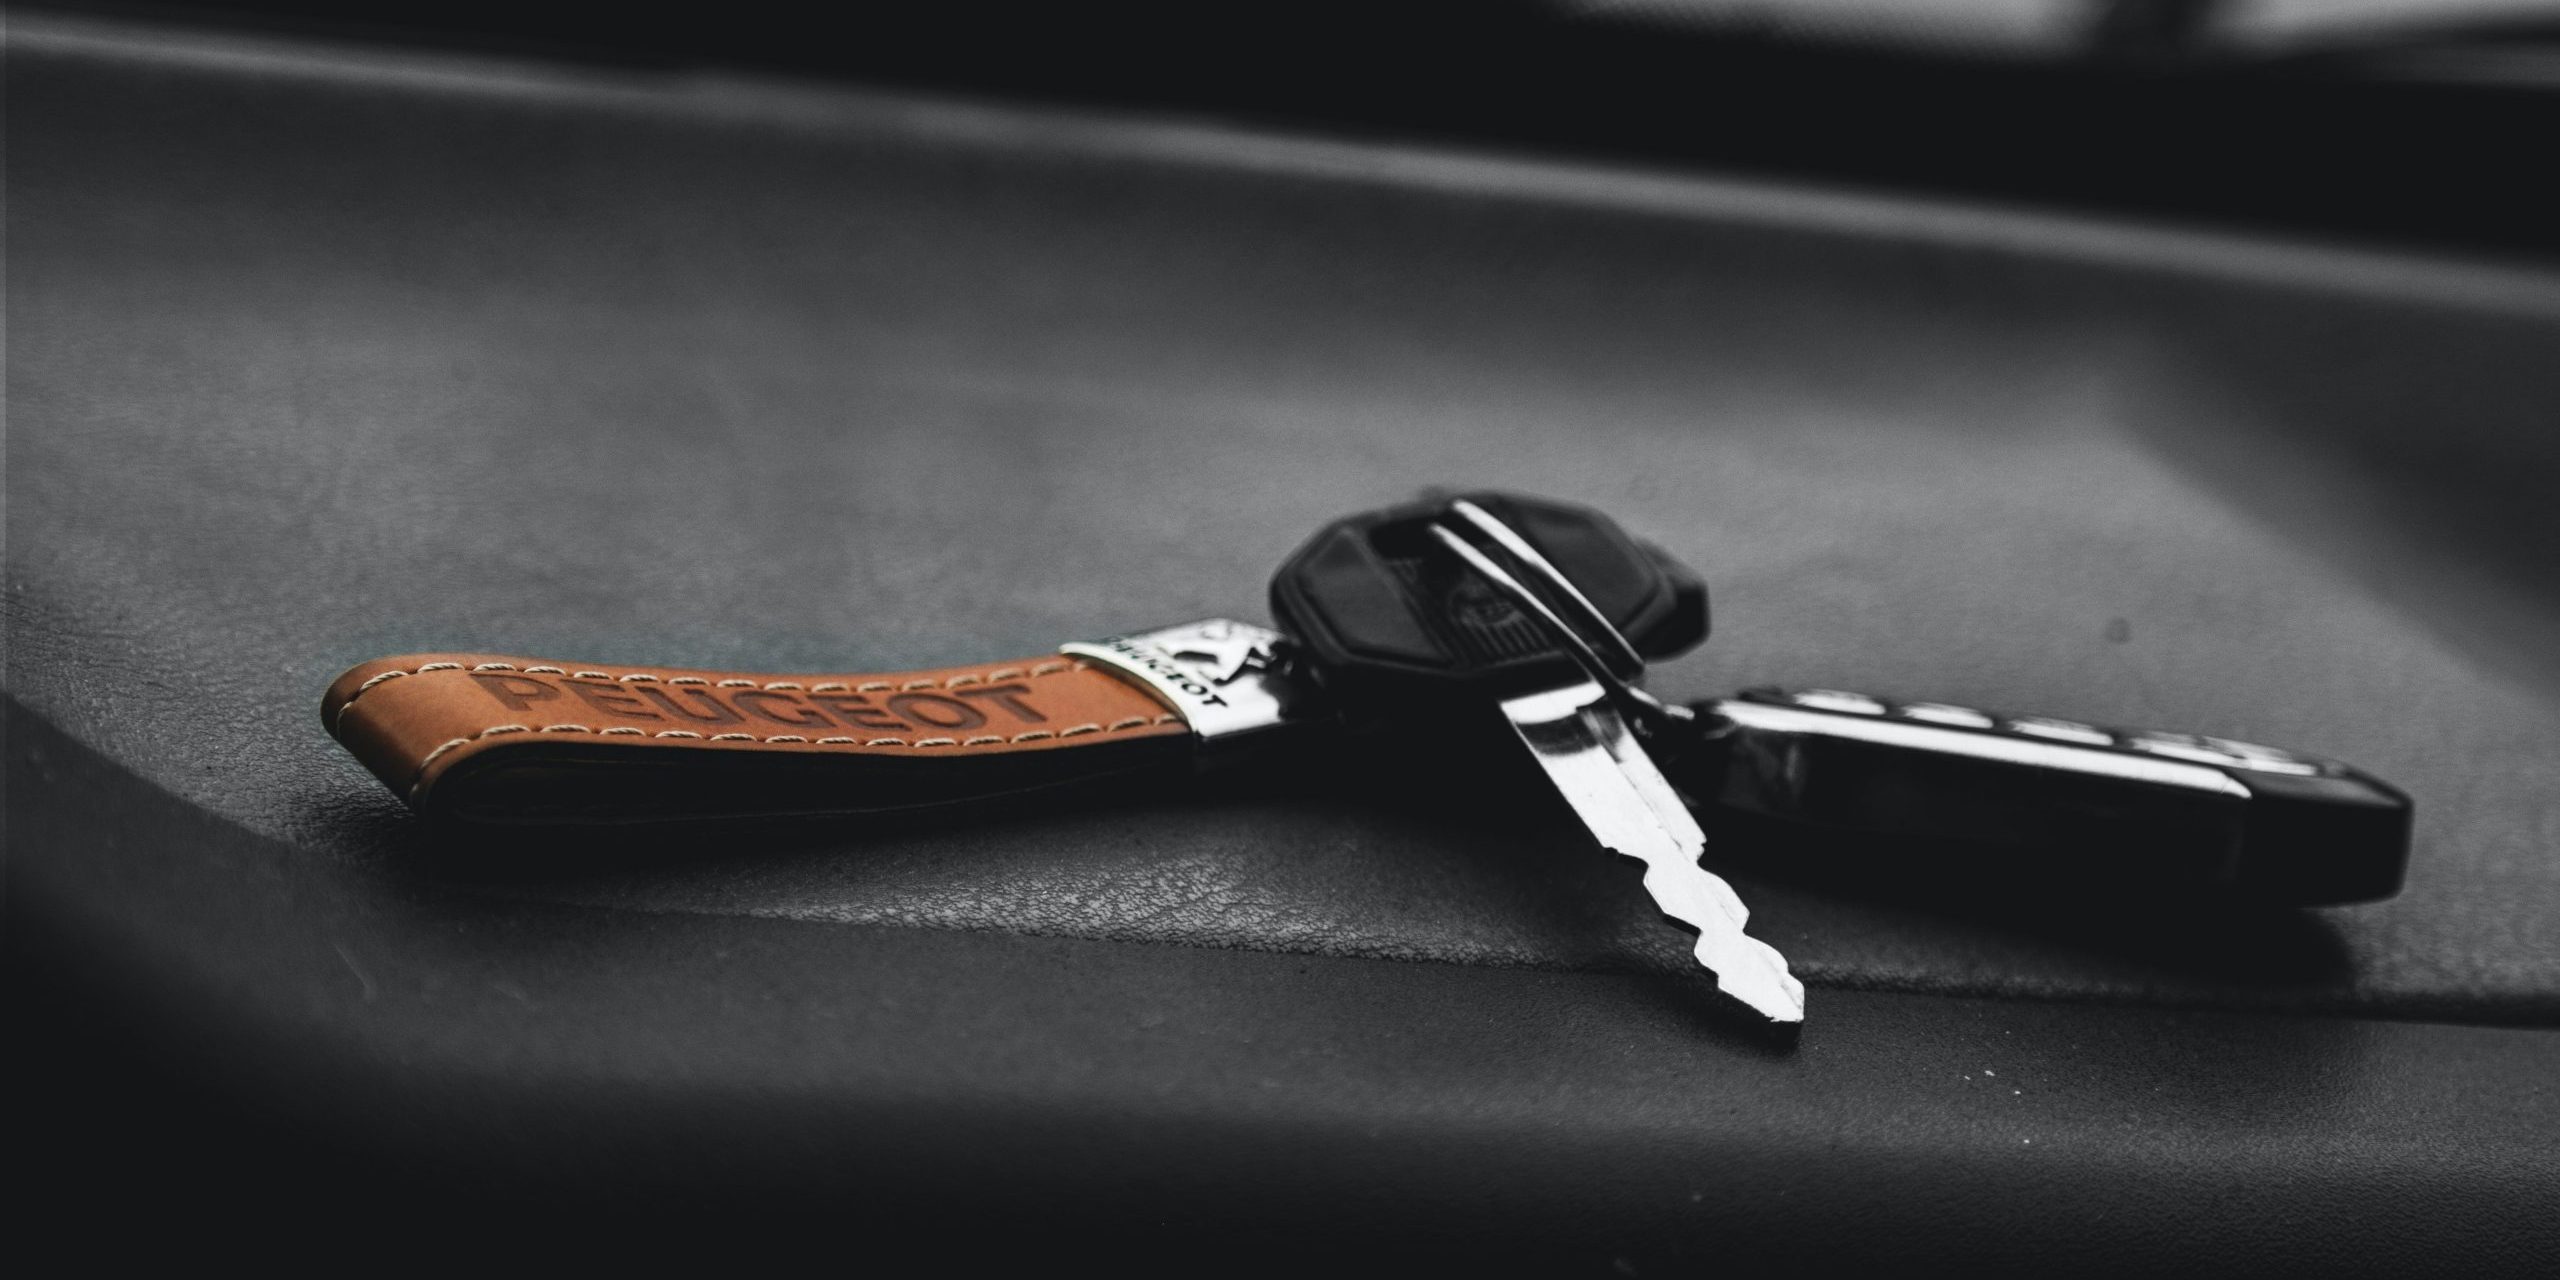 How to find lost remote car key